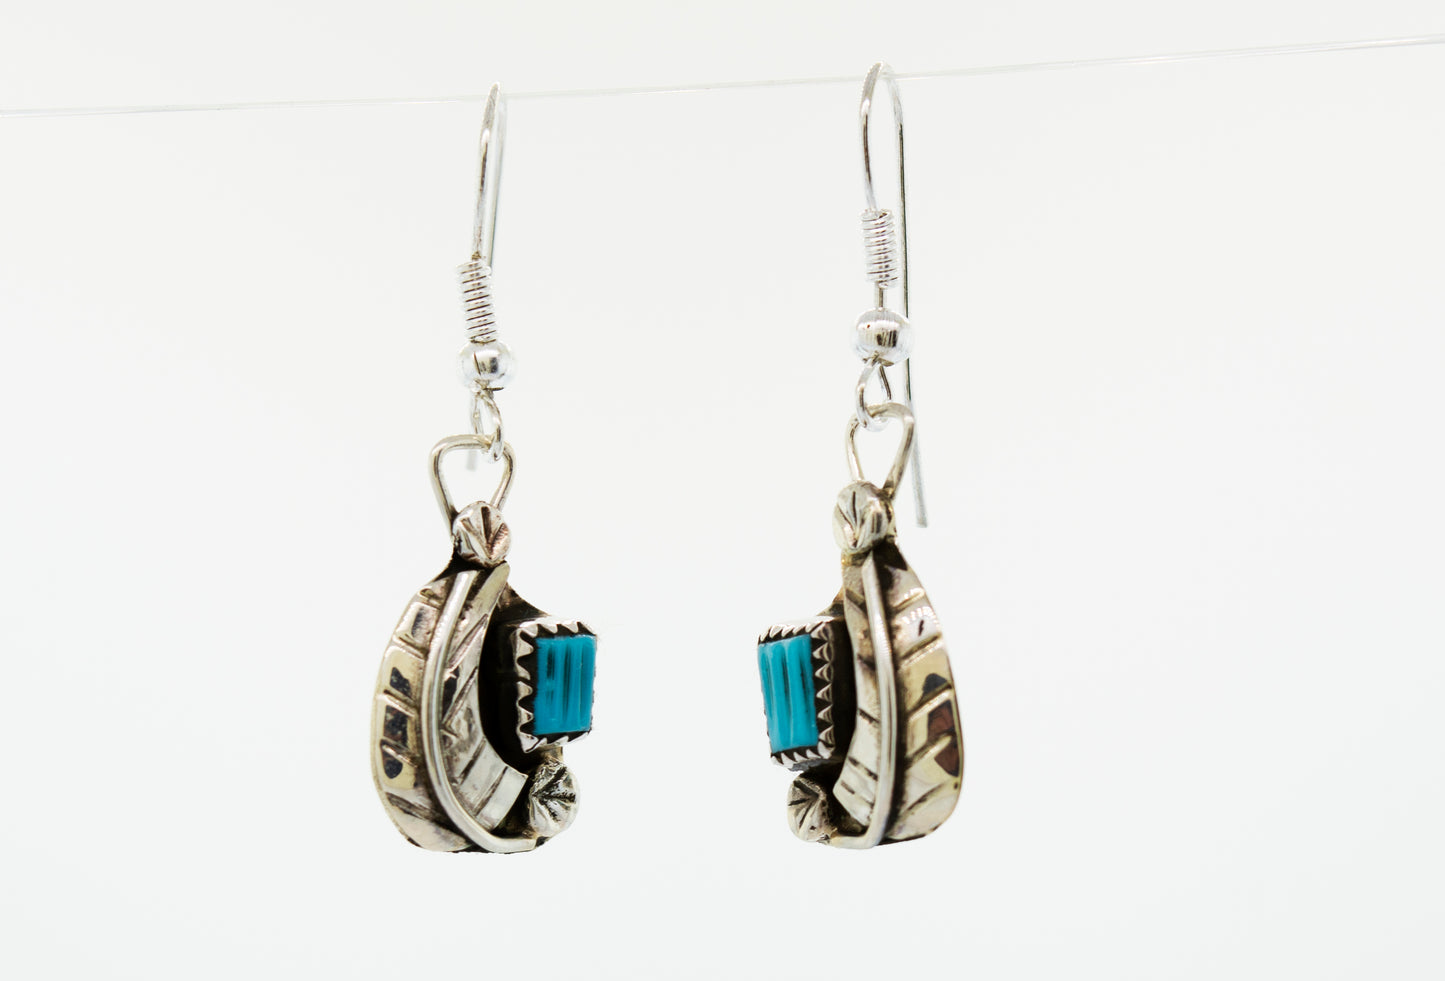 A pair of Zuni Handmade Turquoise earrings with a leaf design, hanging from a Super Silver wire.